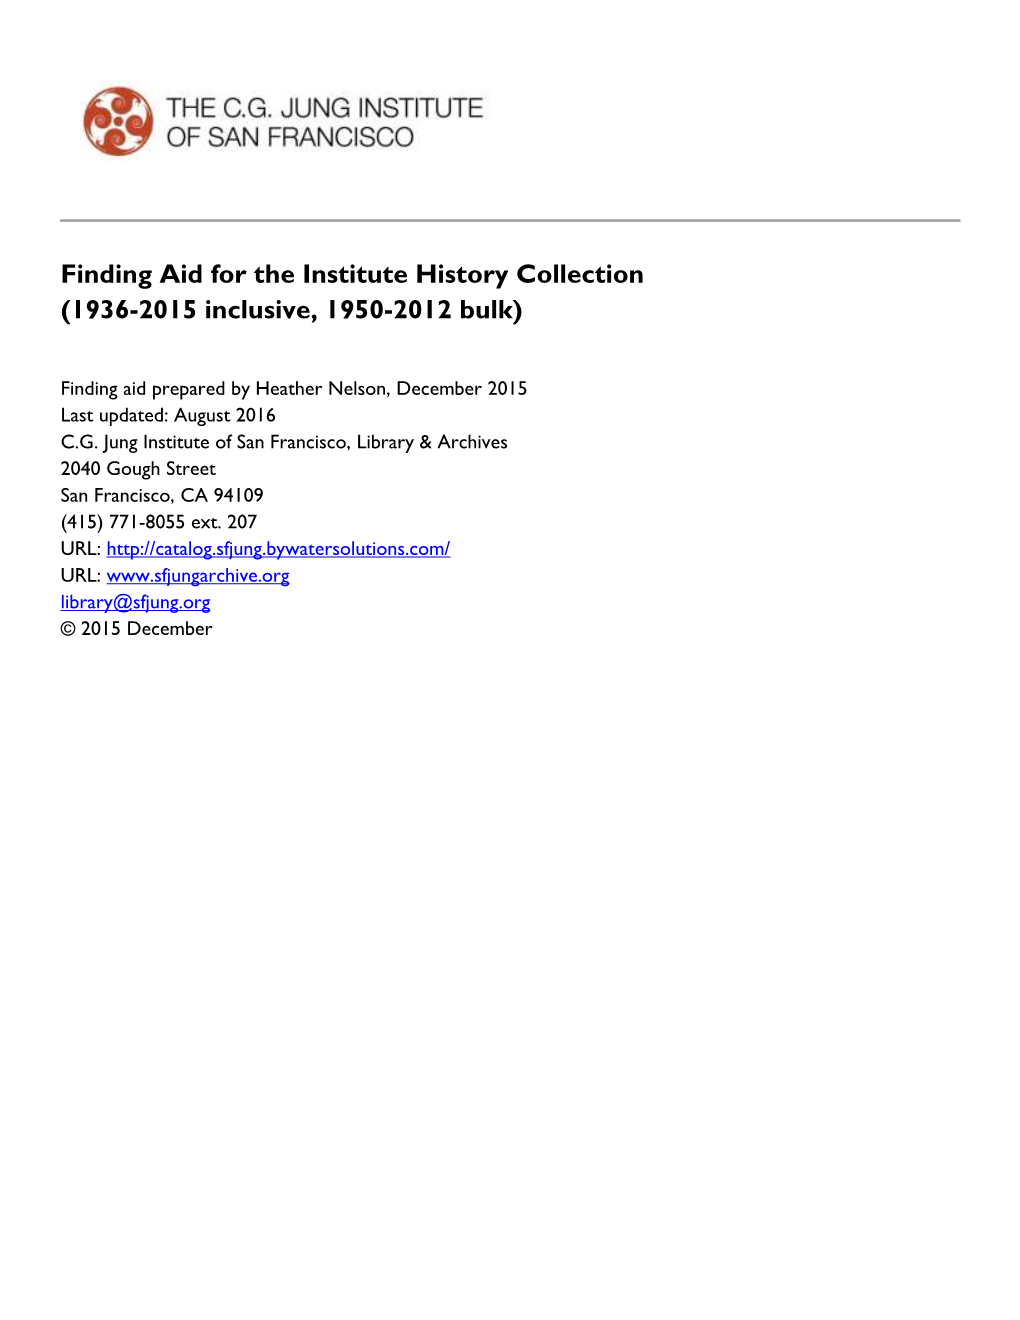 Finding Aid for the Institute History Collection (1936-2015 Inclusive, 1950-2012 Bulk)